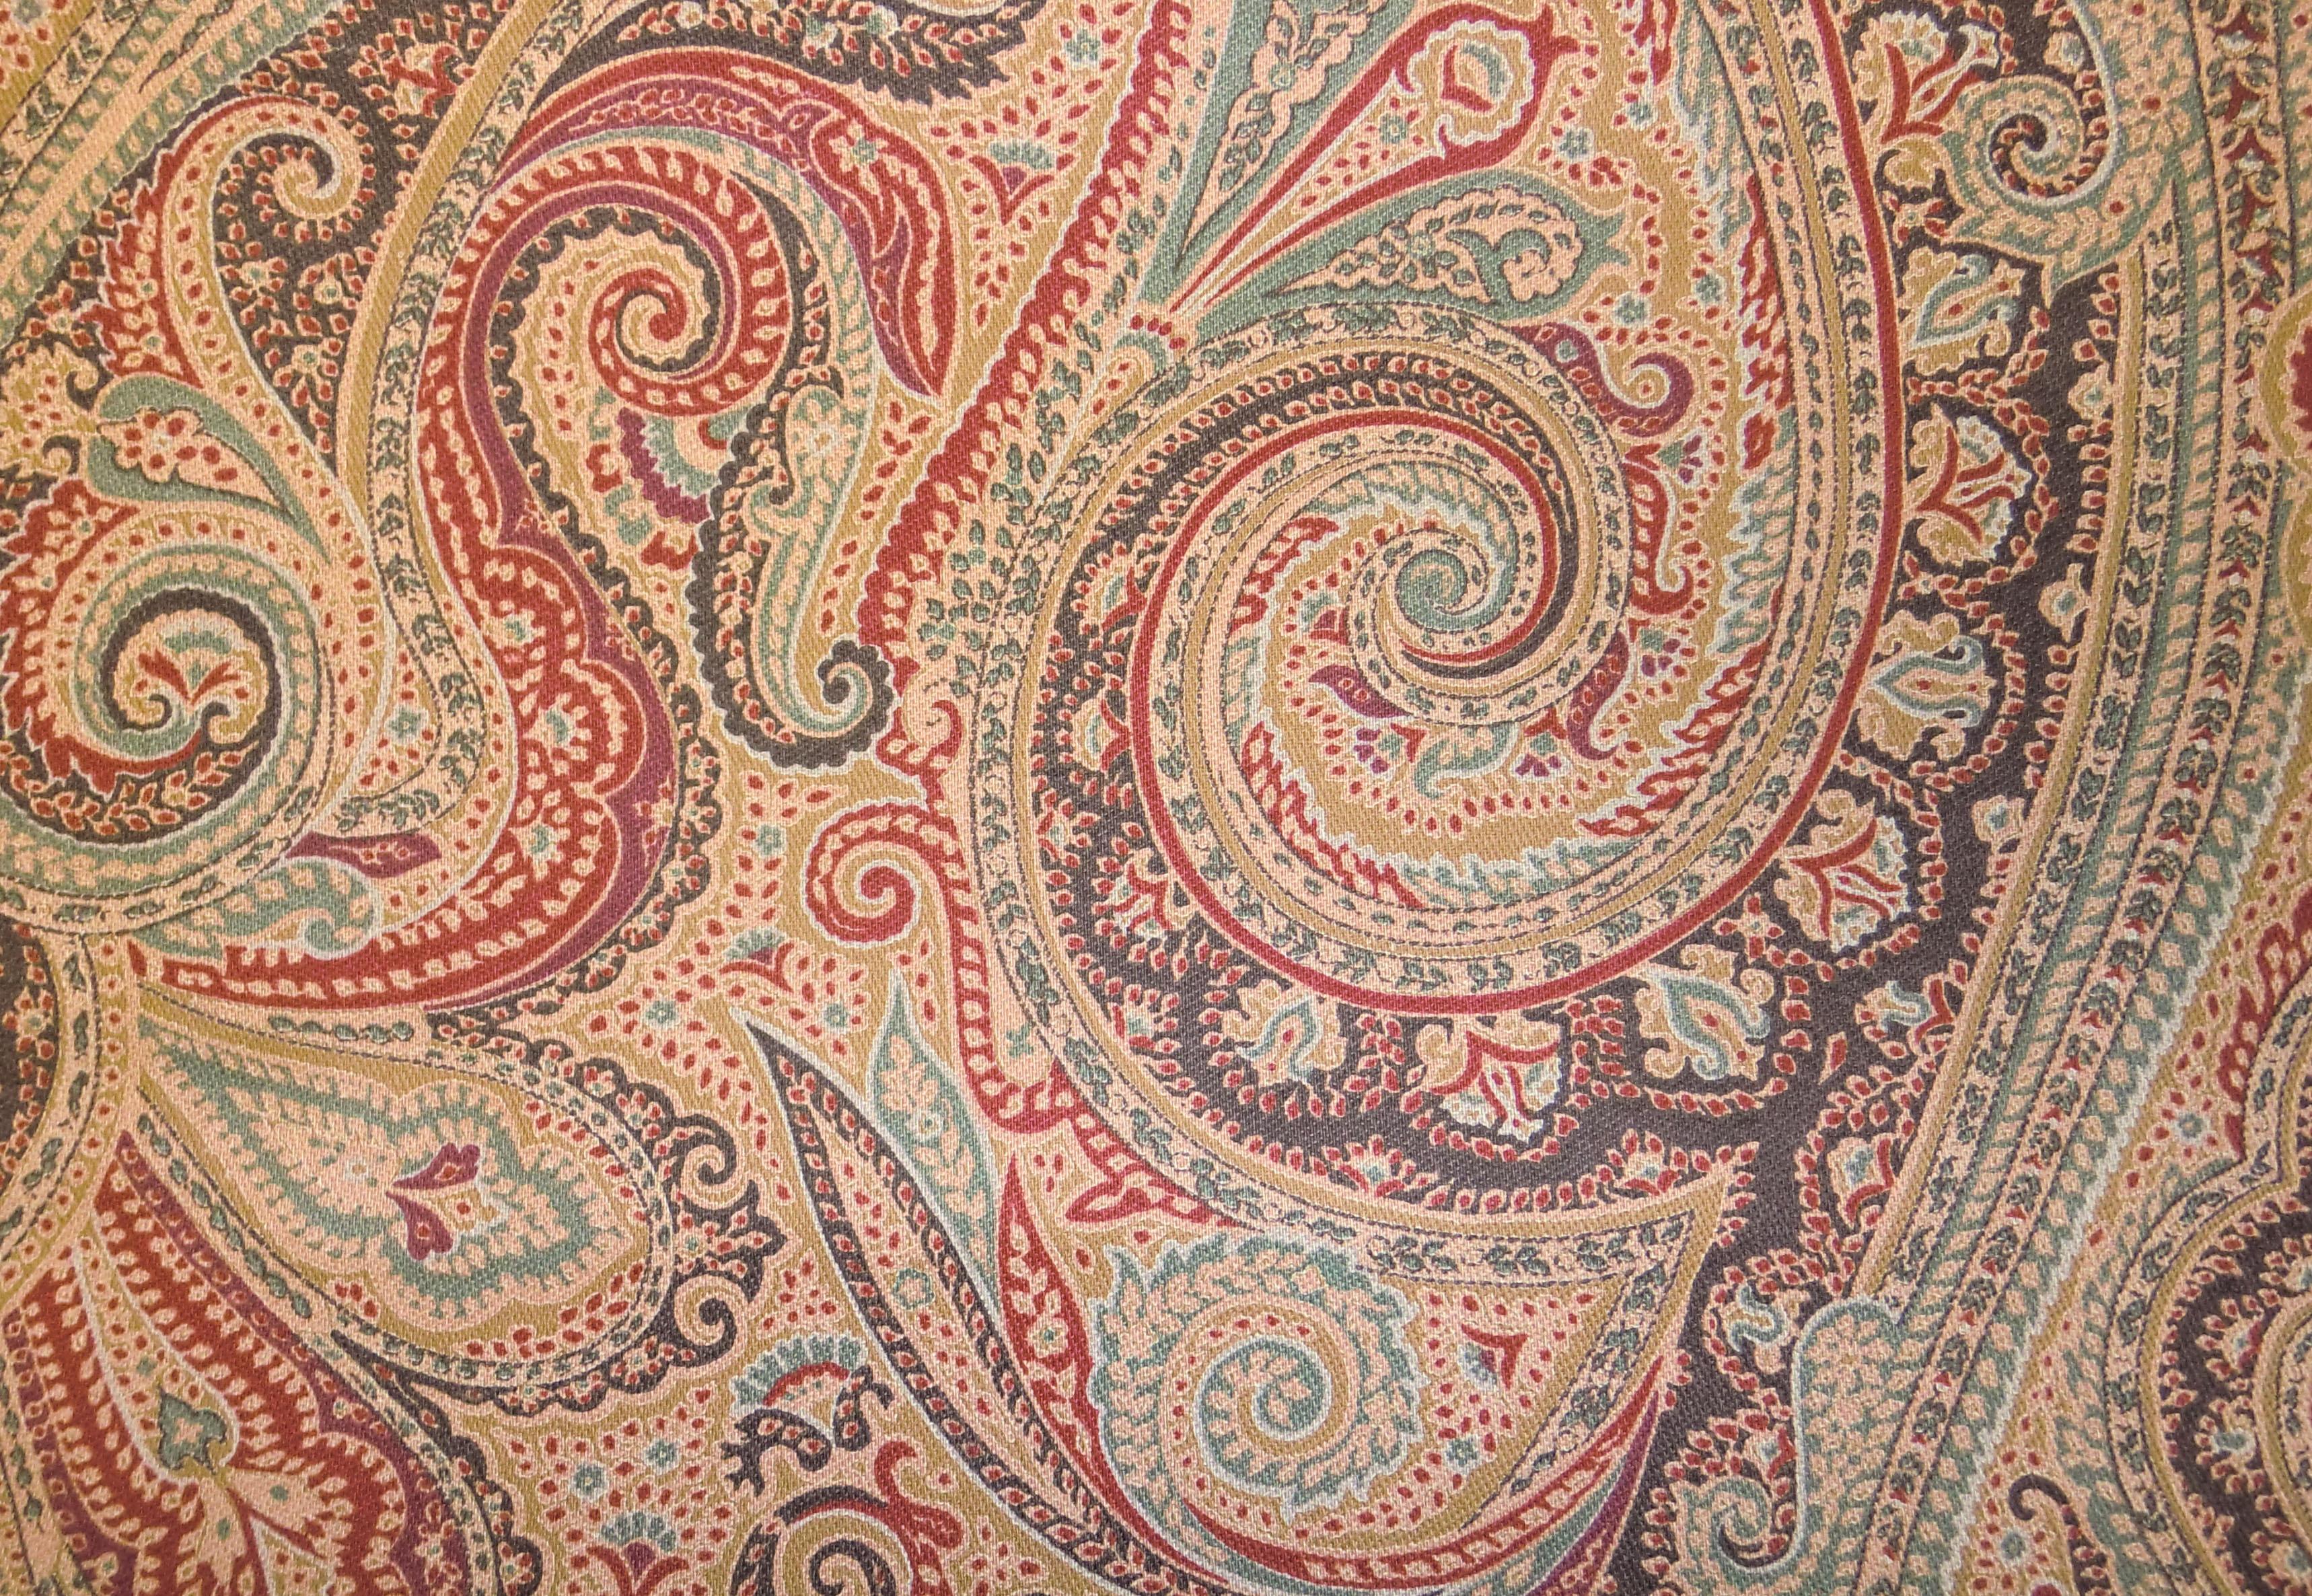 Paisley Fabric Design And